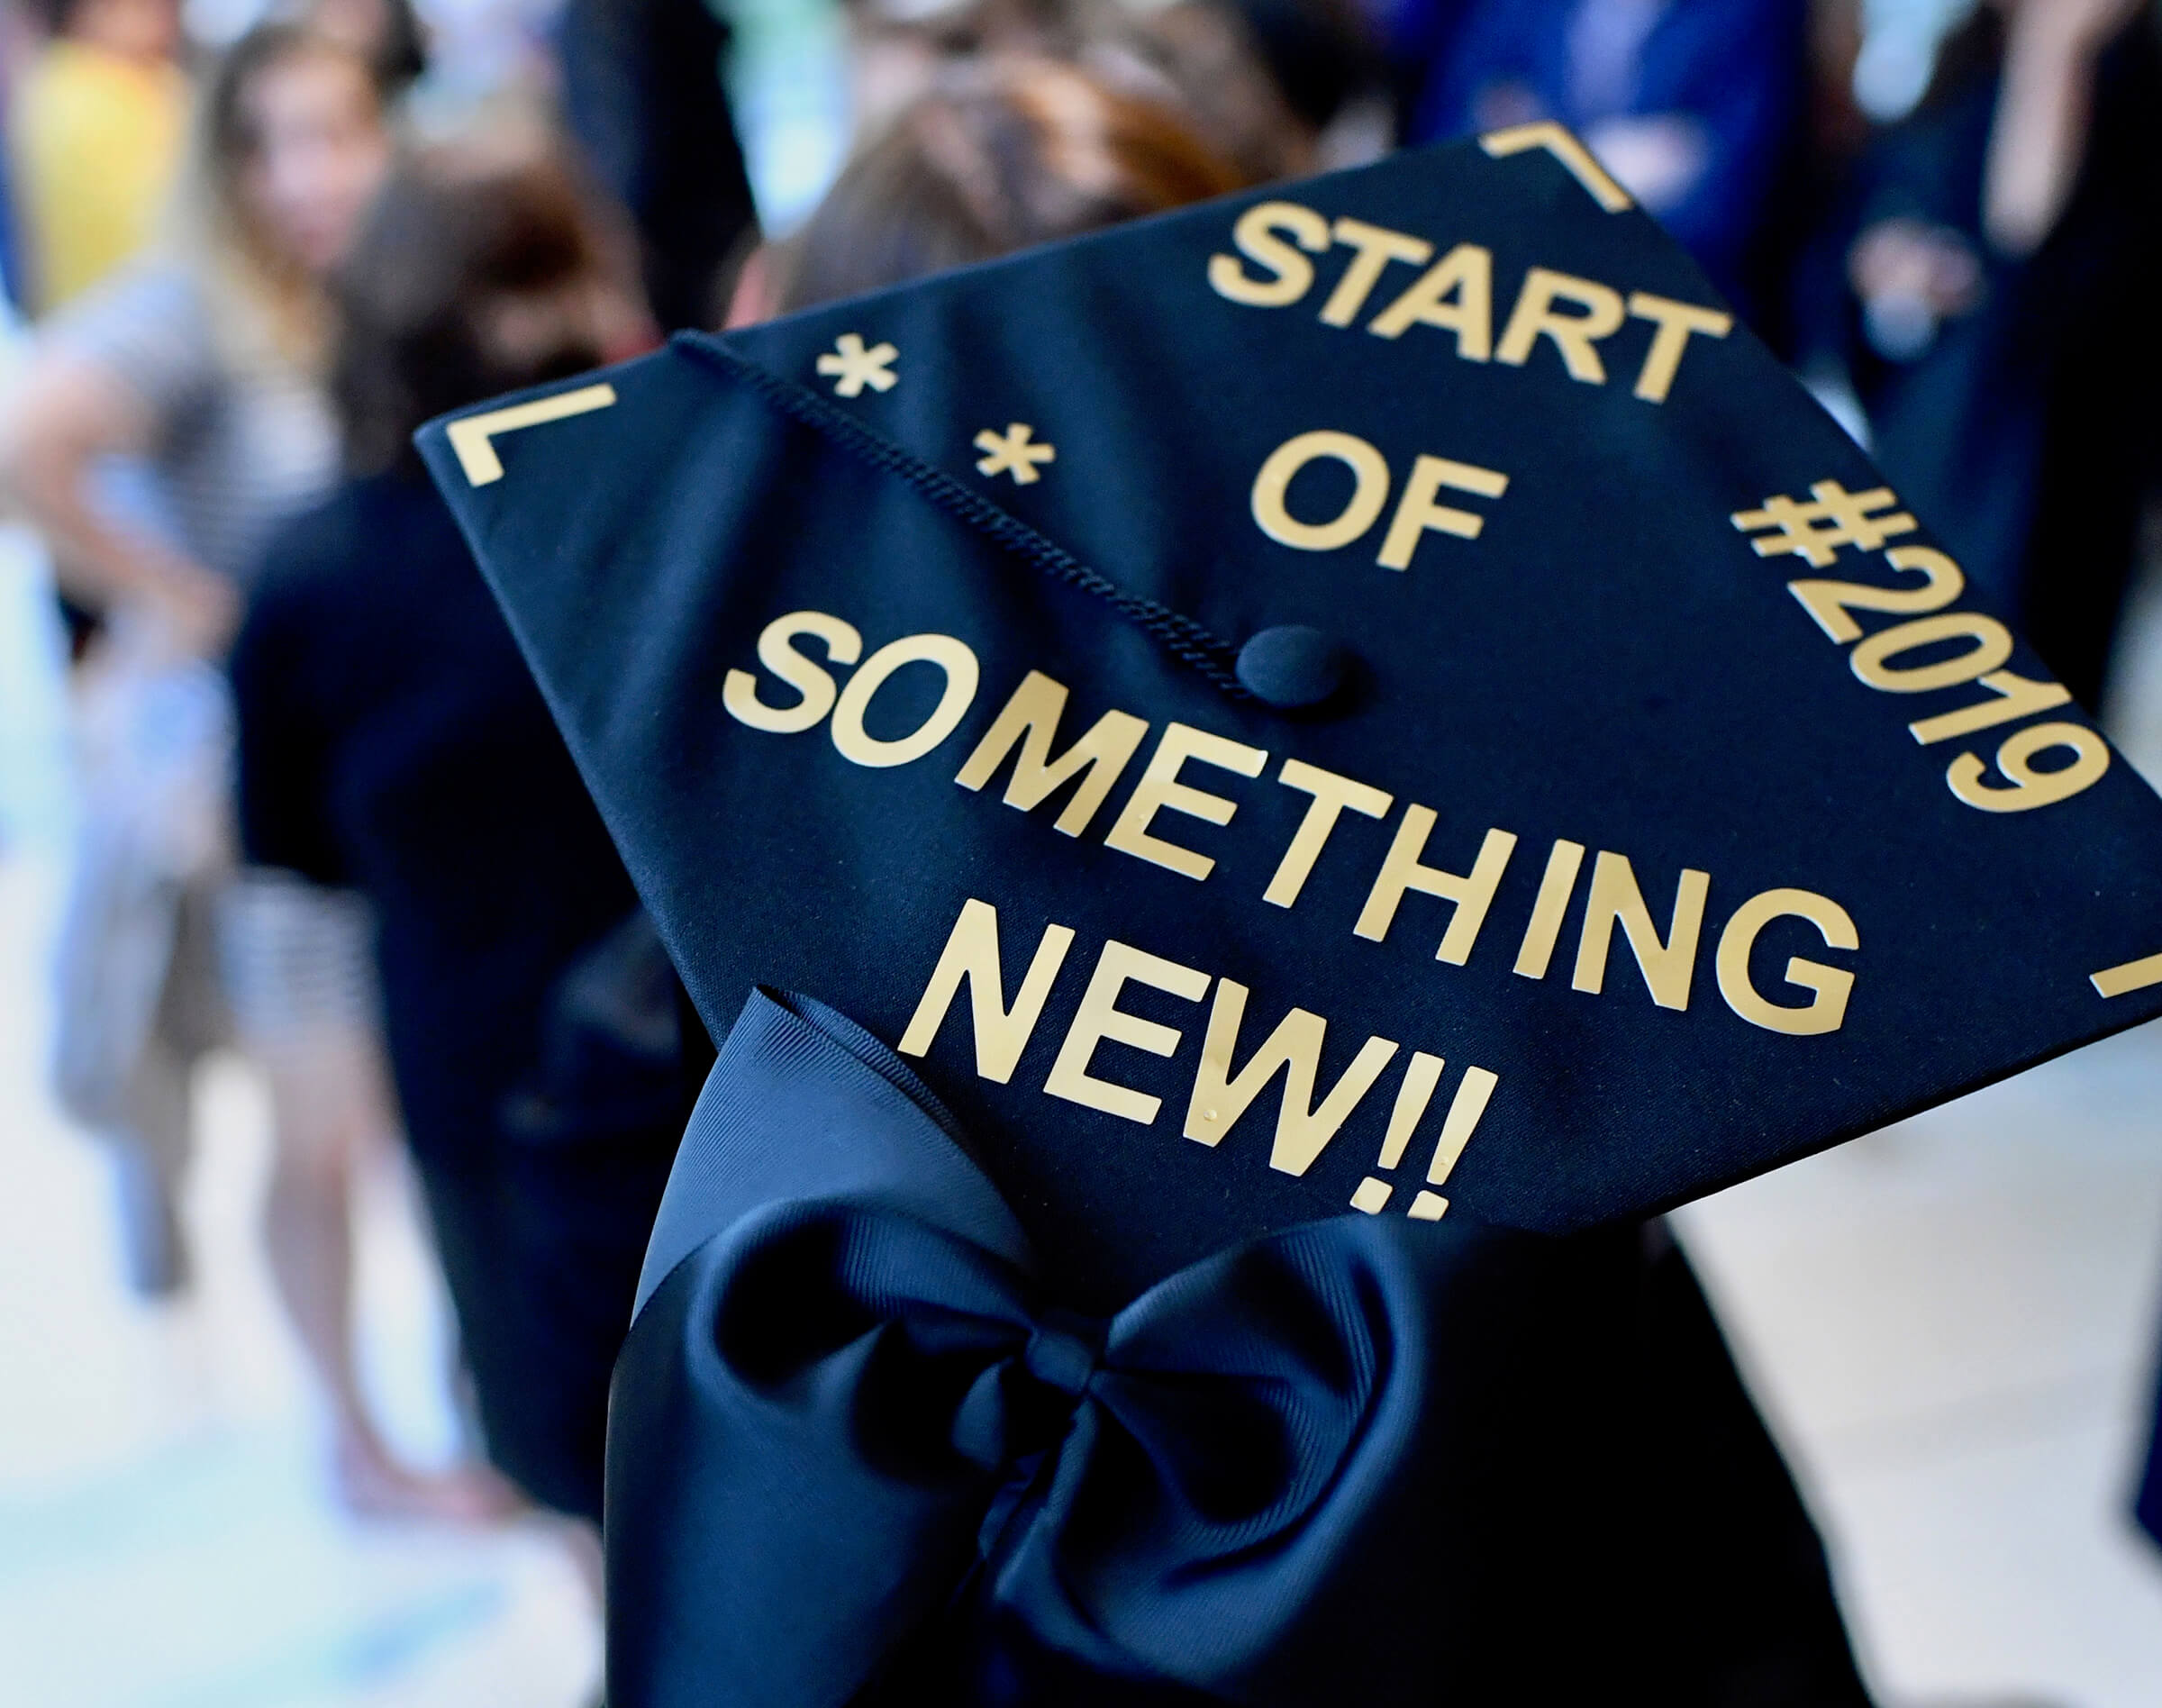 It's the start of something new for our class of 2019 Lander Colleges graduates!